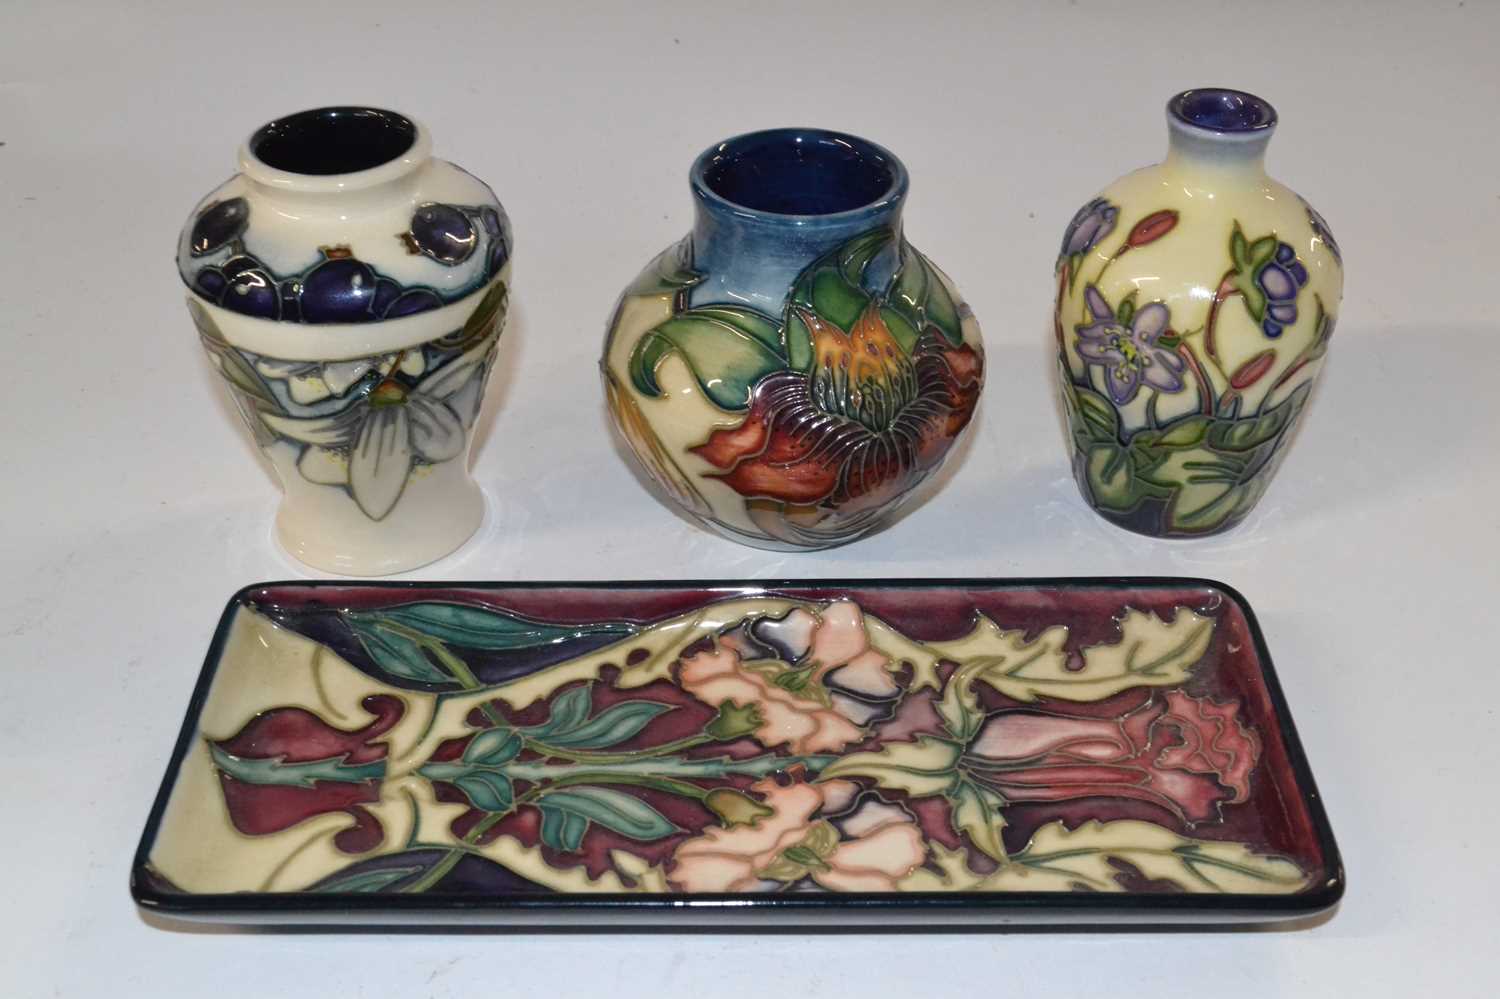 A group of modern Moorcroft wares, all with typical tubelined designs including a small